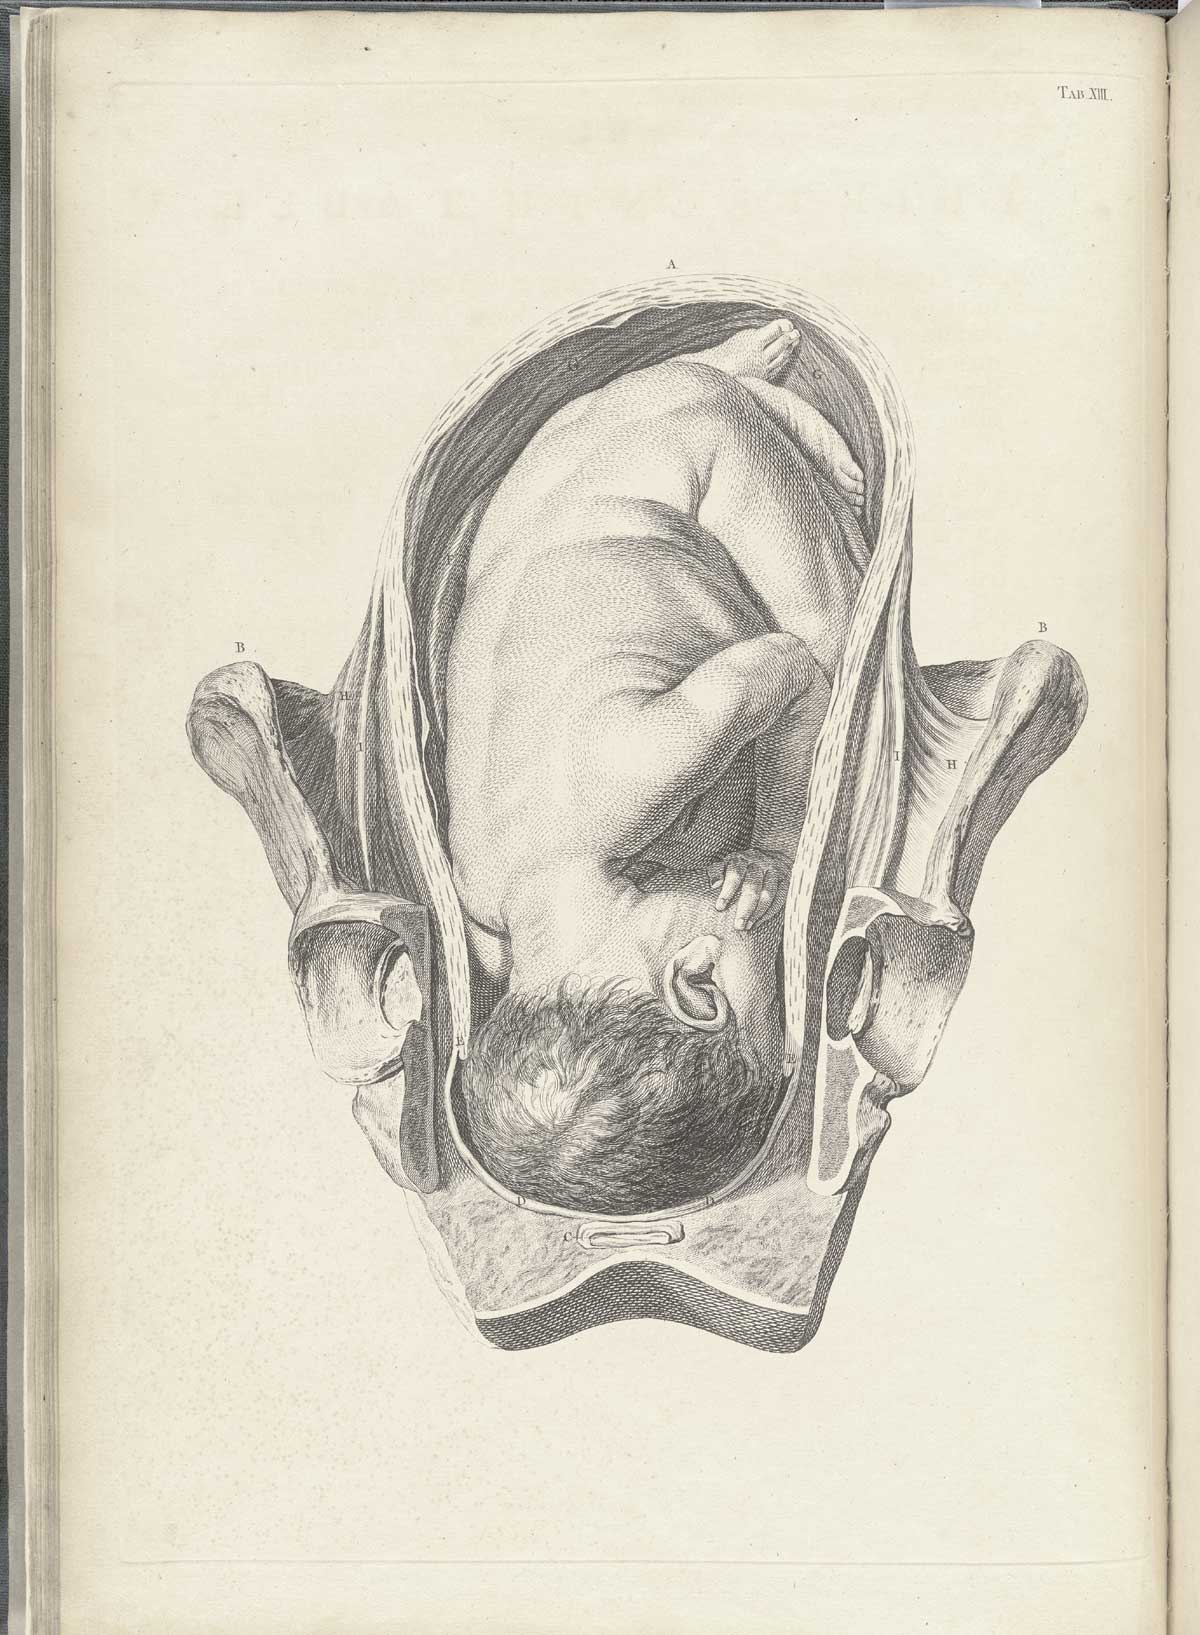 Table 13 of William Smellie's A sett of anatomical tables, with explanations, and an abridgment, of the practice of midwifery, featuring the illustrated drawing of a woman's pelvis and uterus with a fetus.